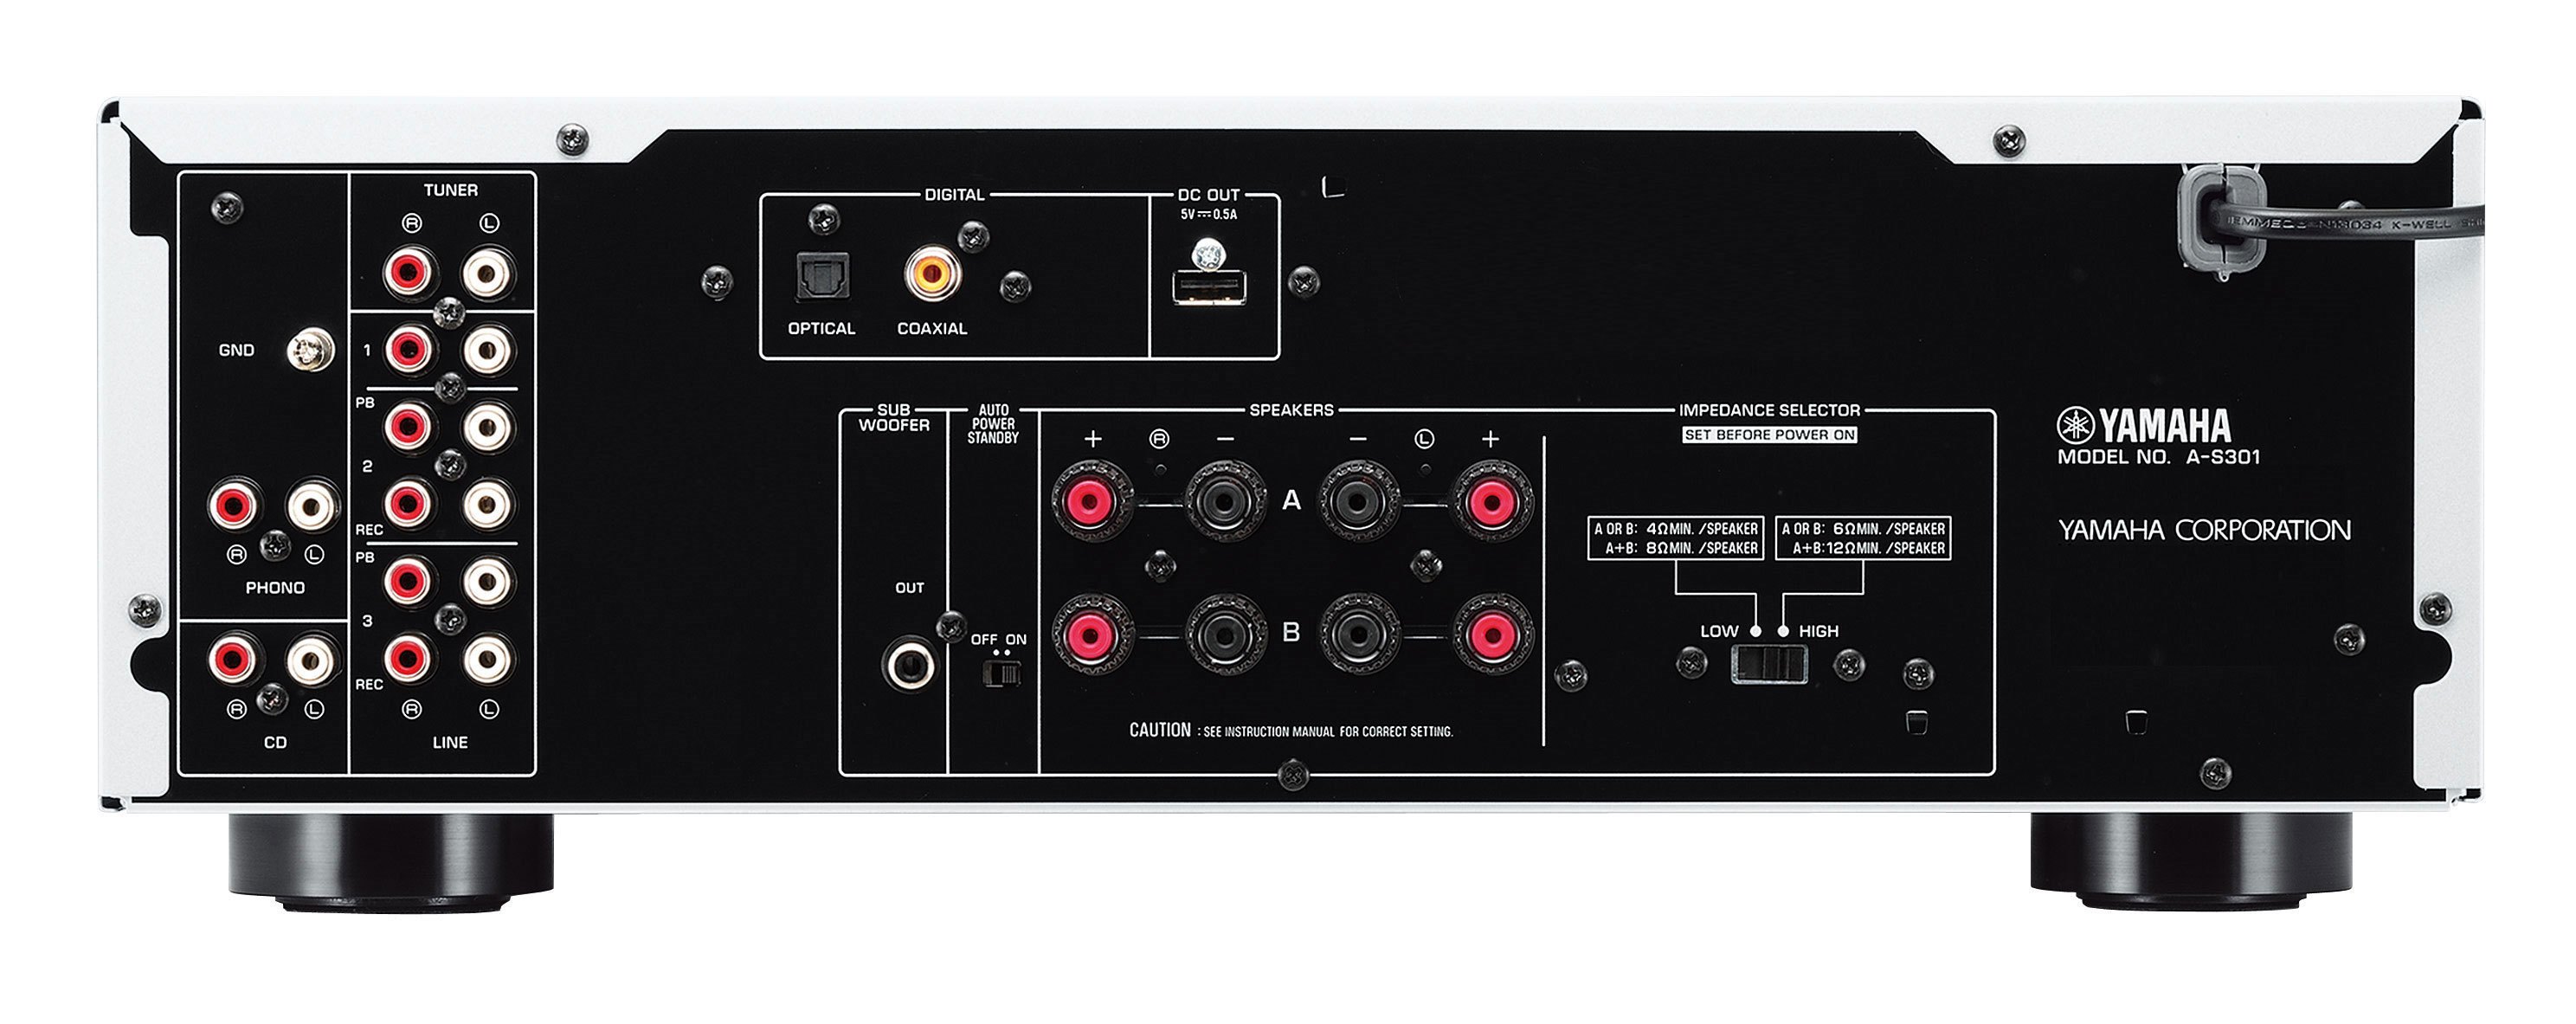 A-S301 - Features - Hi-Fi Components - Audio & Visual - Products